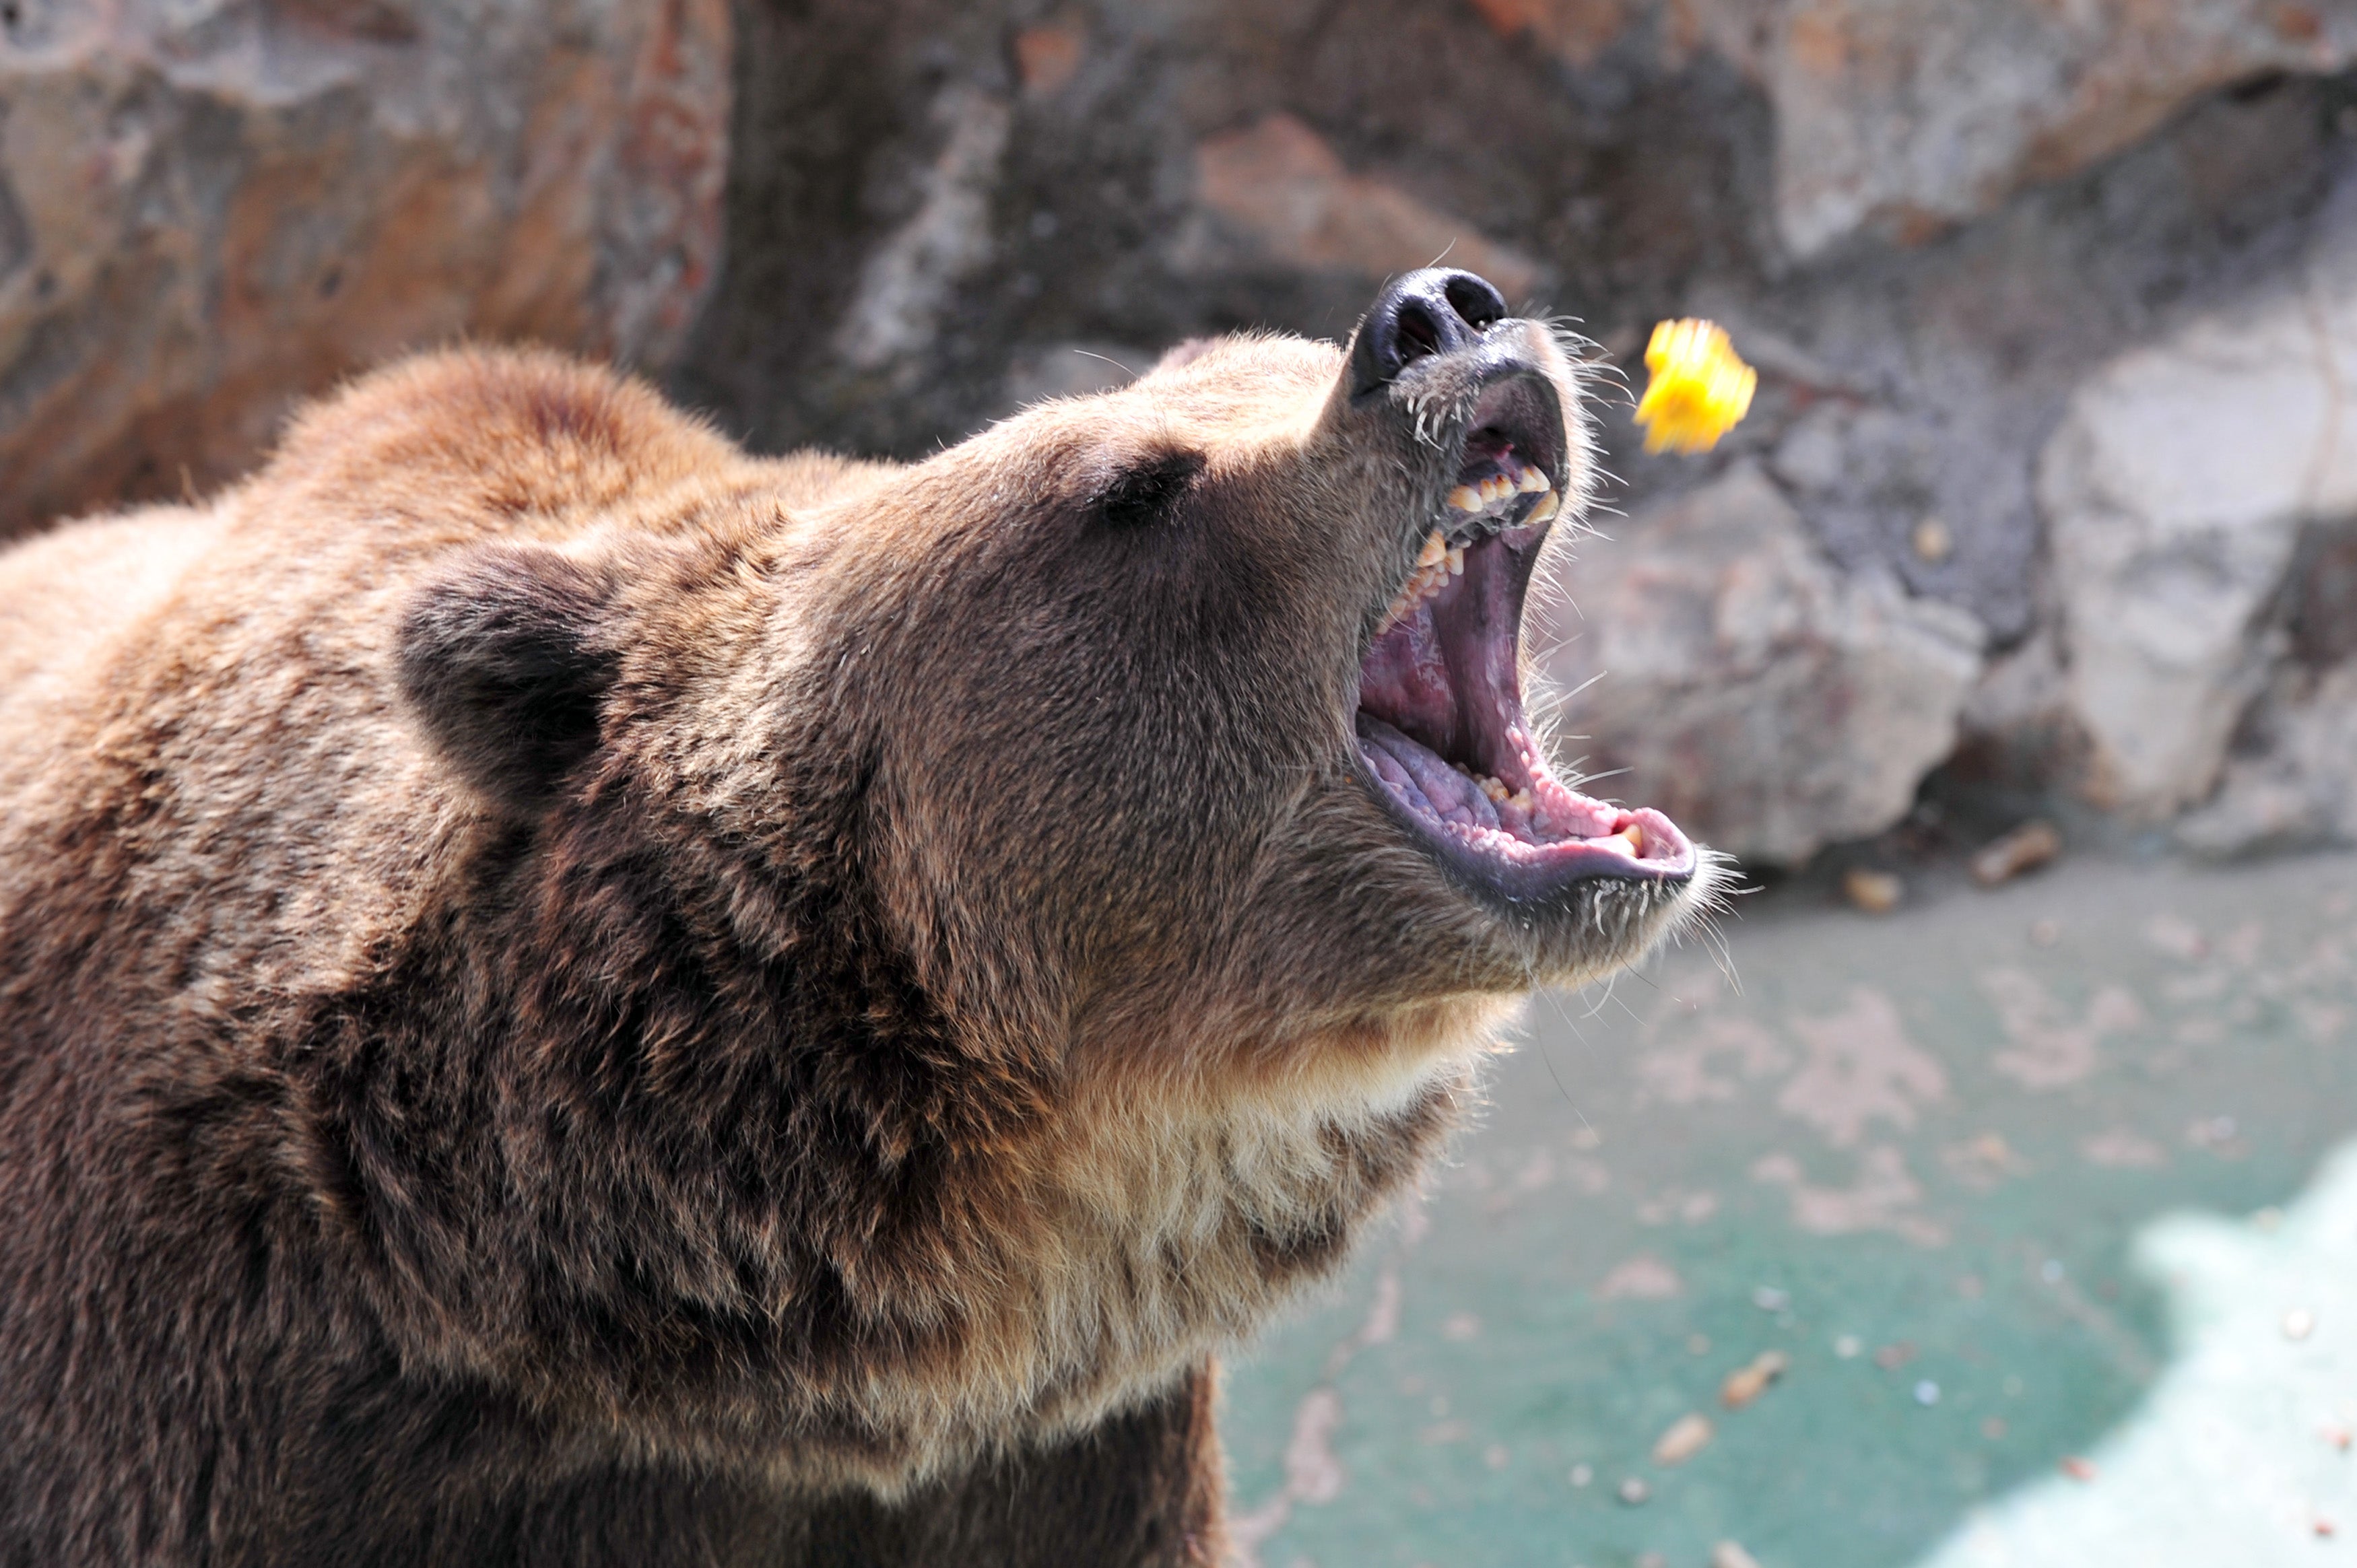 A brown bear receives food from a tourist at the Safari park in Fasano, in Italy’s Apulia region on 4 August 2011